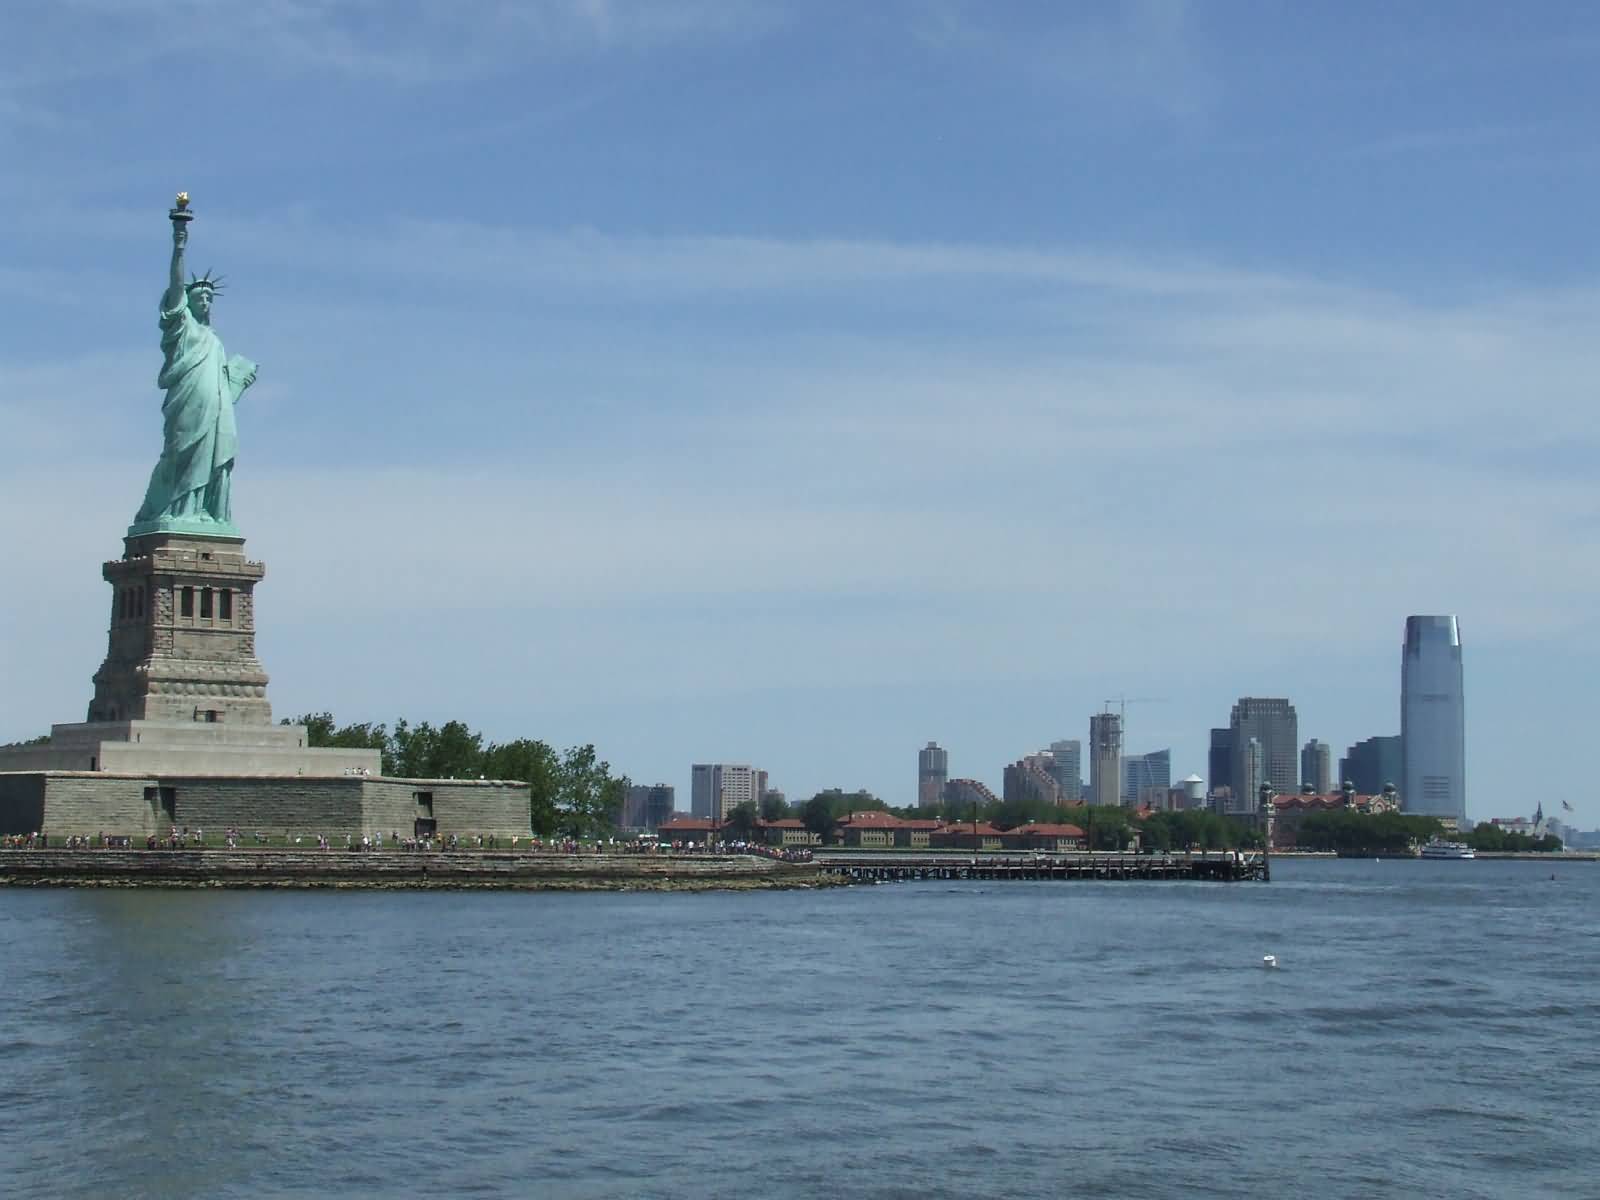 Statue Of Liberty On The Bank Of Hudson River